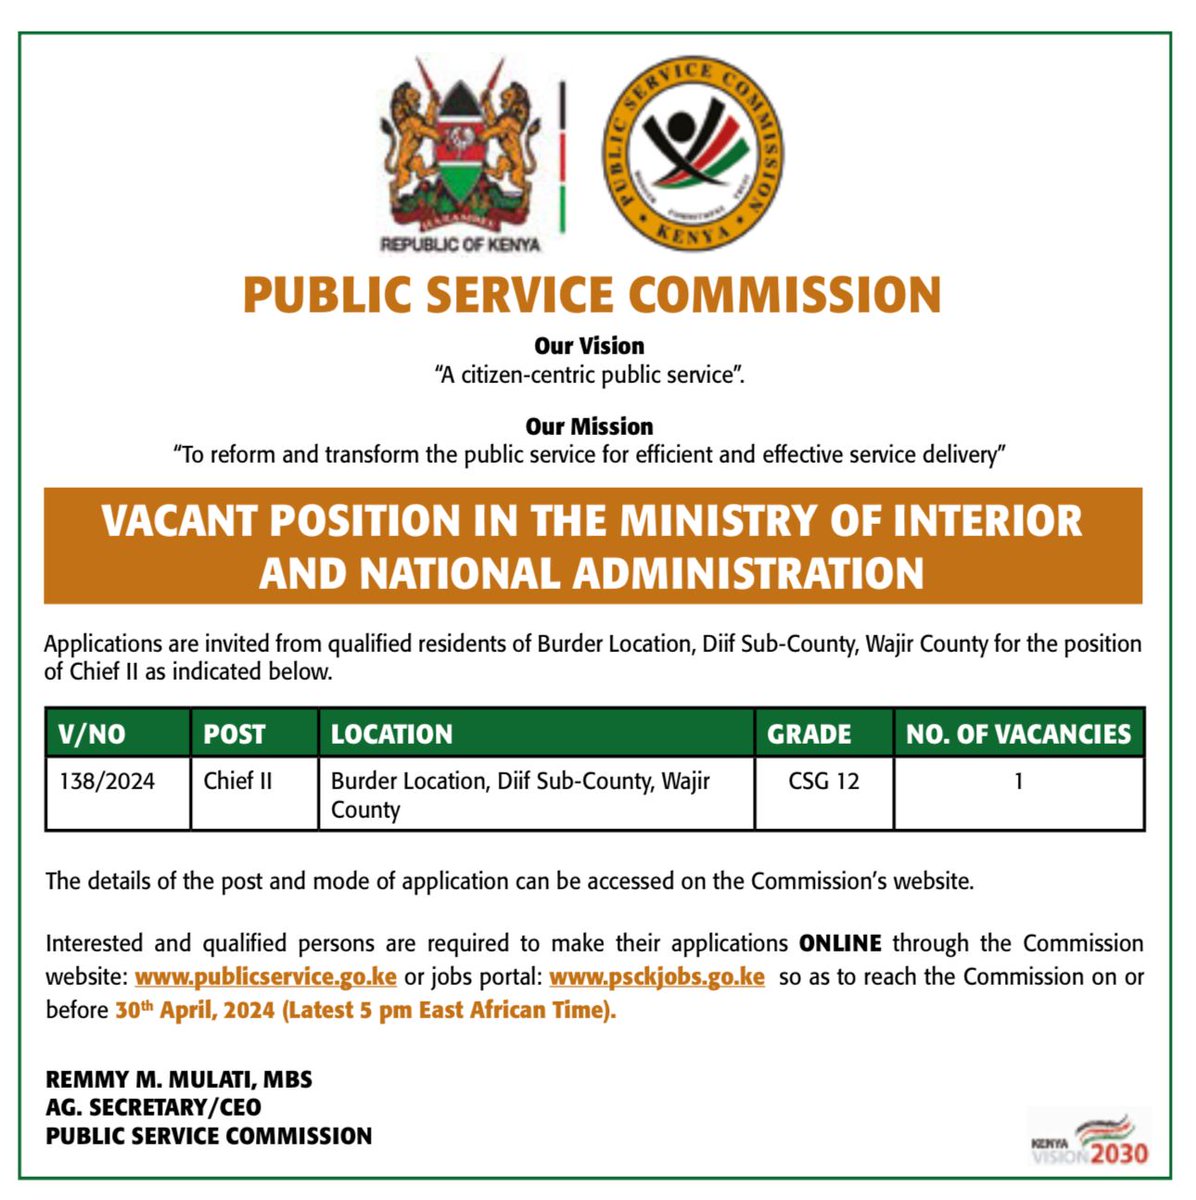 !!!!JOB ALERT!!!! Vacant Position in the Ministry of Interior and National Administration. Application Deadline: 30th April, 2024.